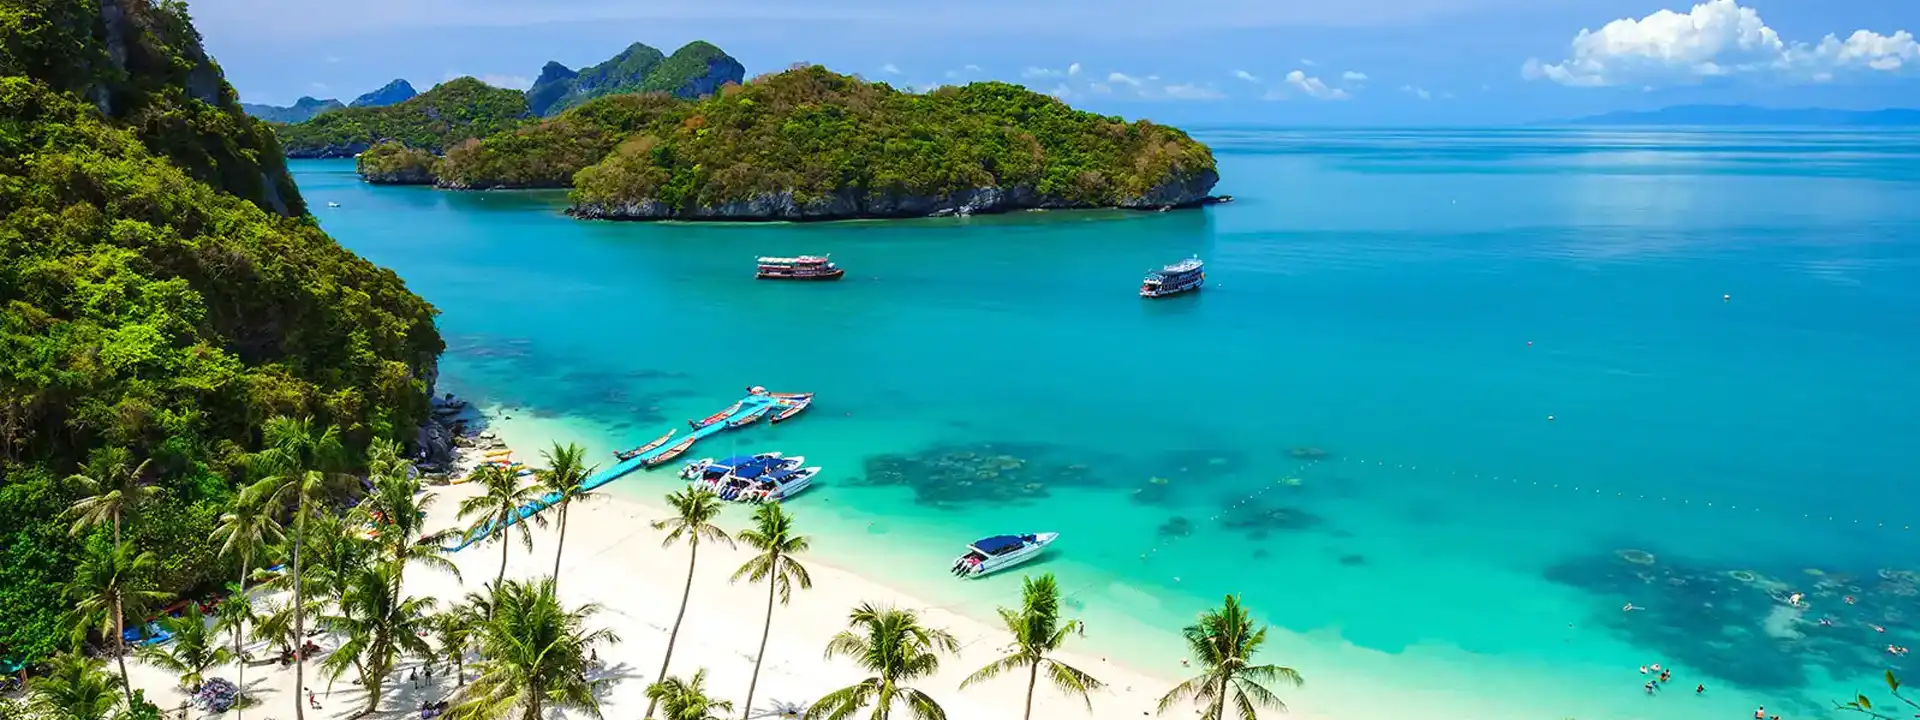 KOH SAMUI Thailand Holiday Package Deals